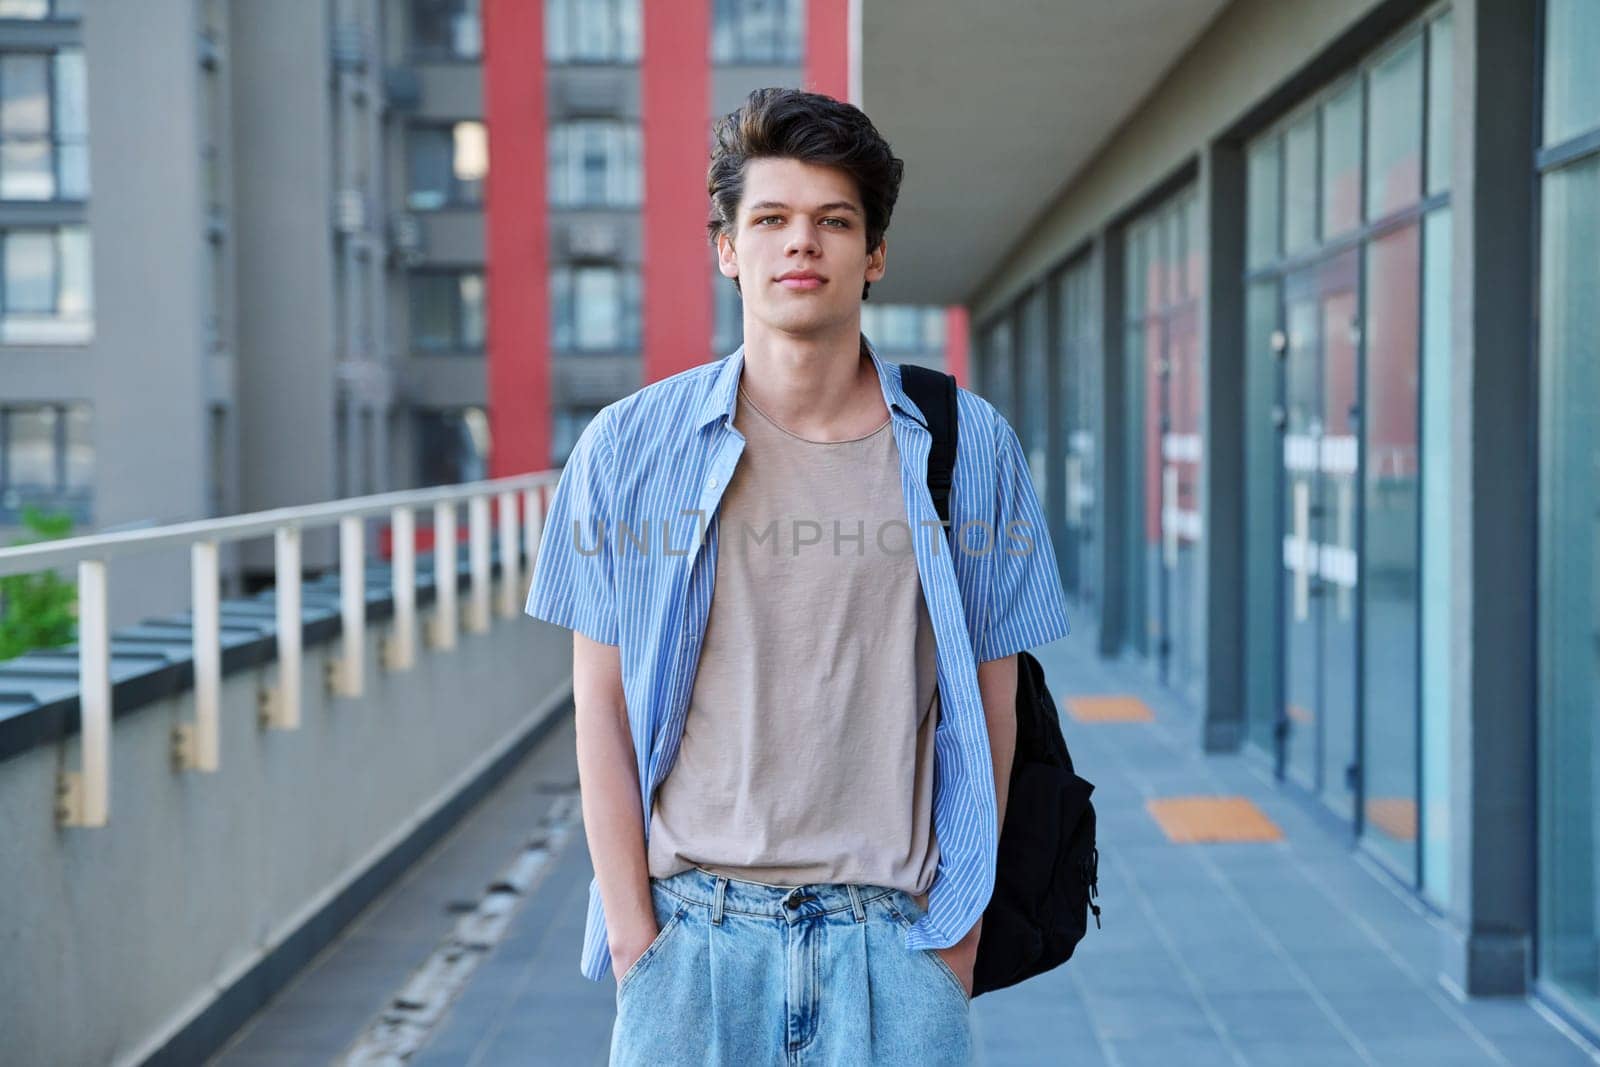 Portrait of confident smiling college student guy, young male with backpack looking at camera, urban outdoor. Education, lifestyle, 19,20 years age youth concept